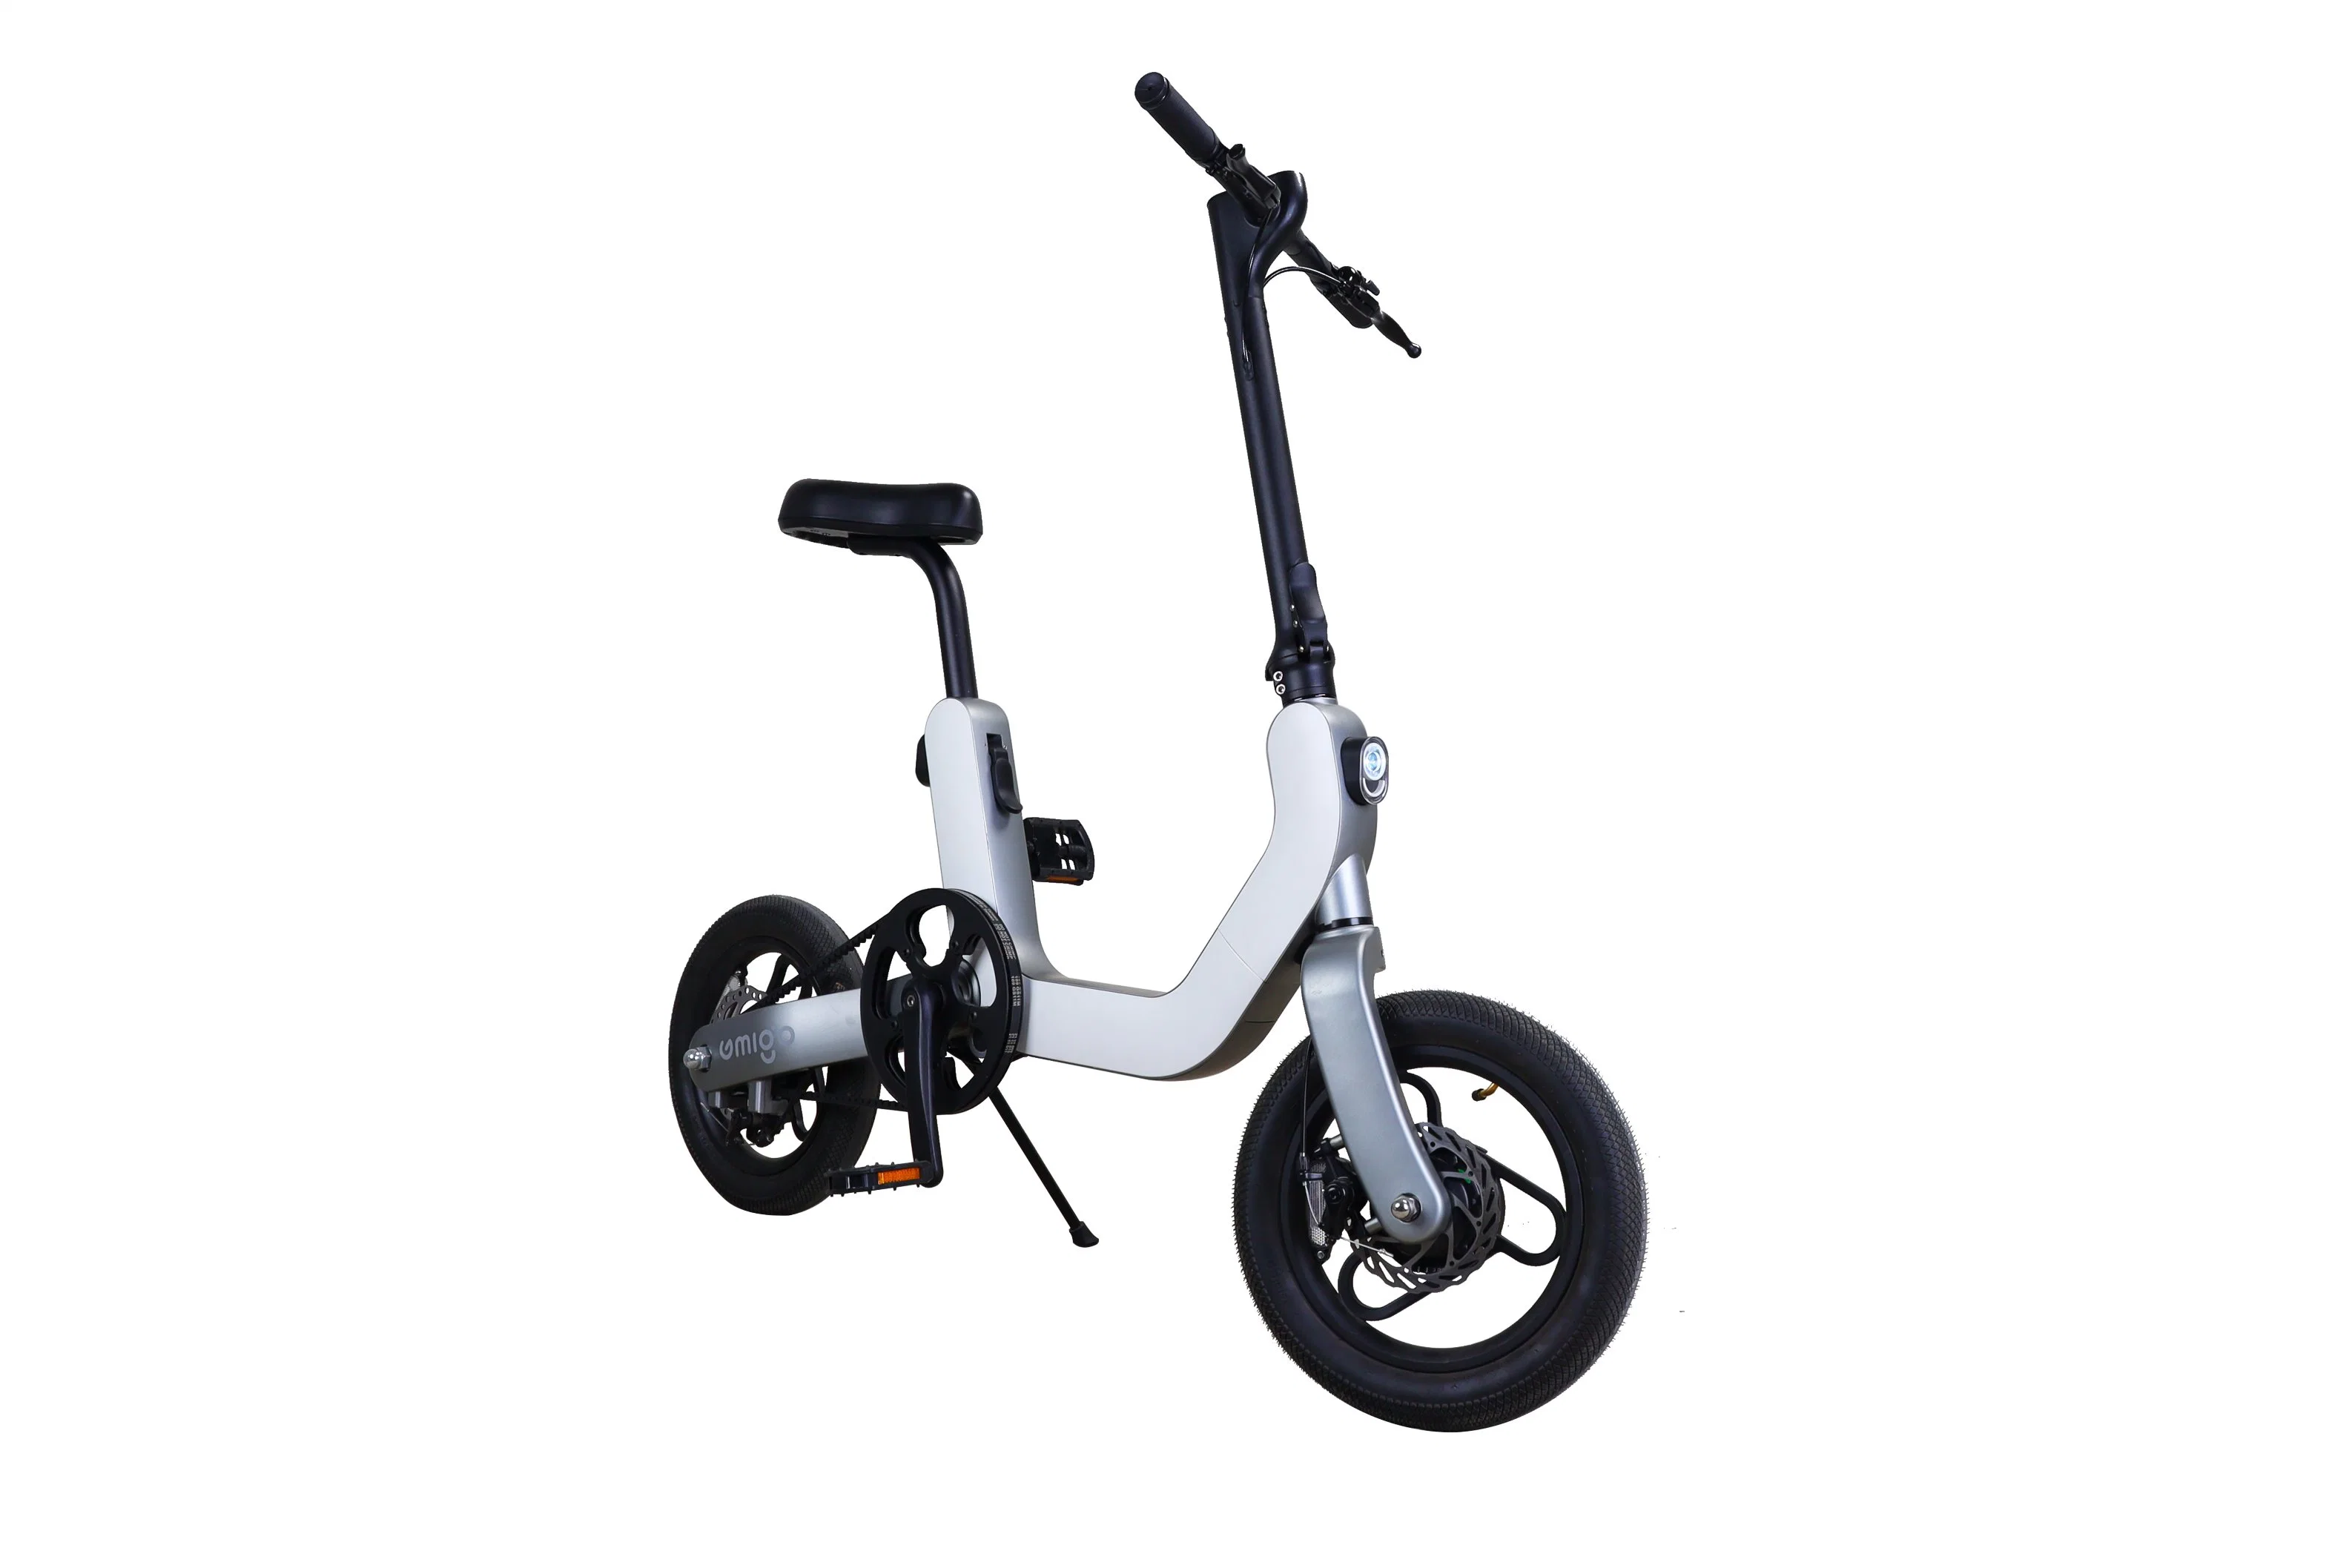 High Quality CE Certification Durable Service Handiness Micro Fold E Bicycle with 250W Rear Hub Motor Rainproof Electric Bike